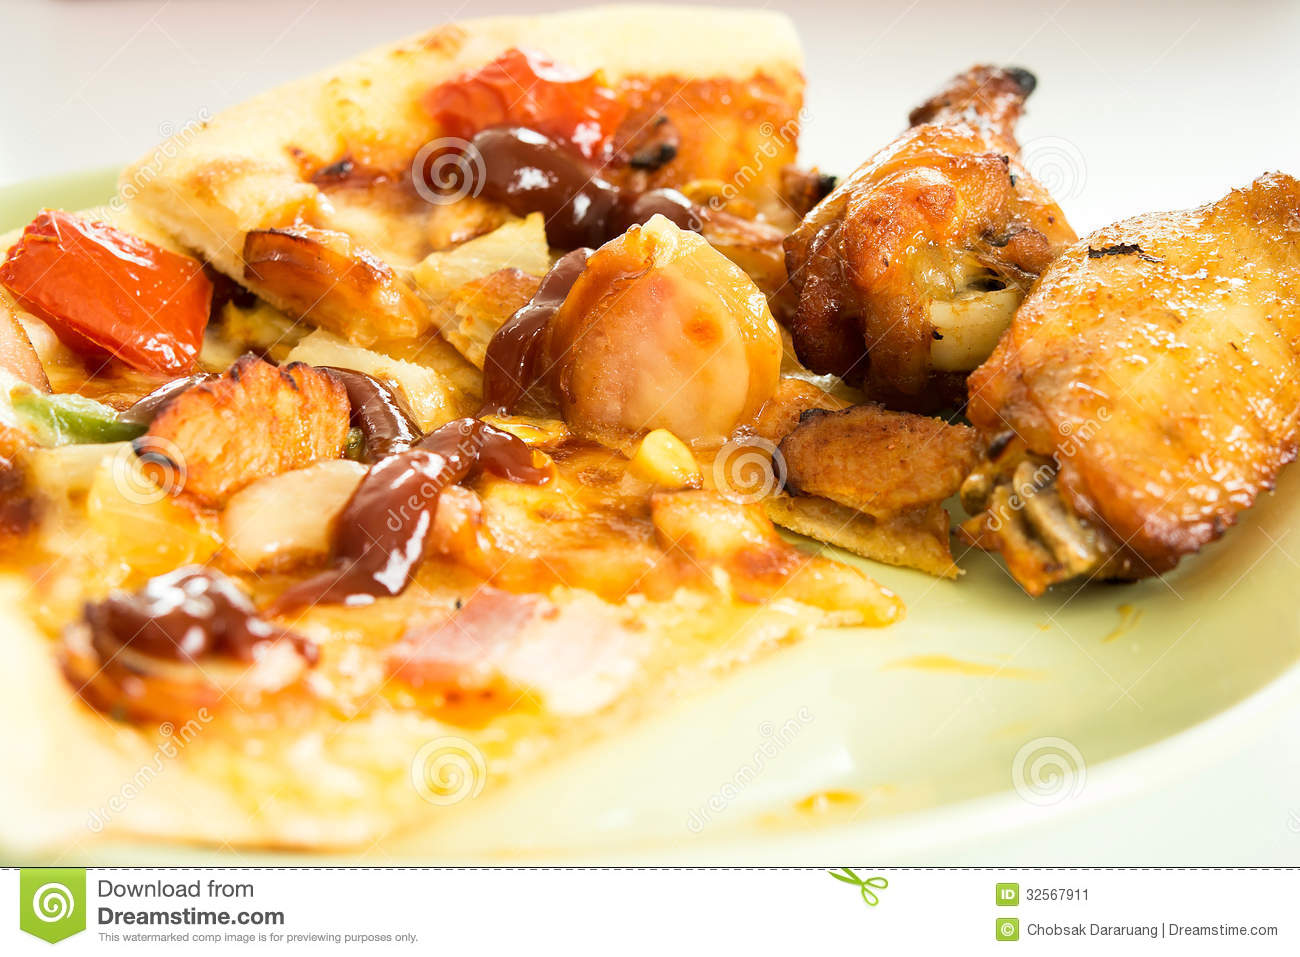 Sausage Pizza With Grill Chicken At Lunch Time 